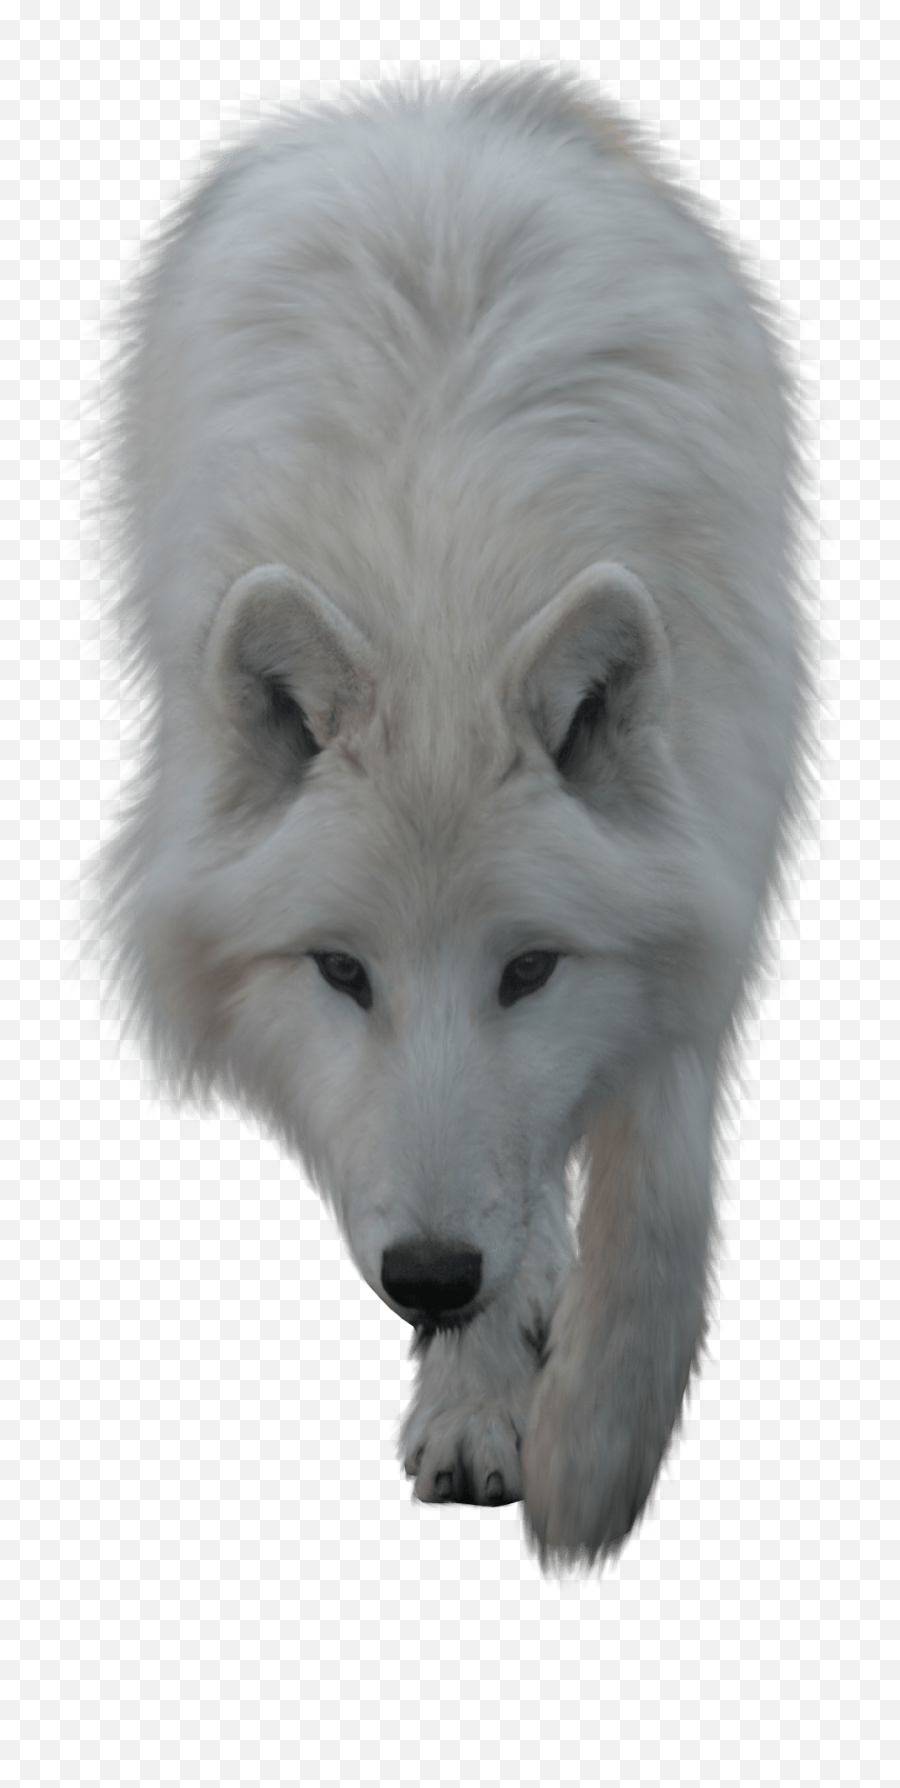 Wolves Png 6 Image - White Wolf Transparent Background,Wolves Png